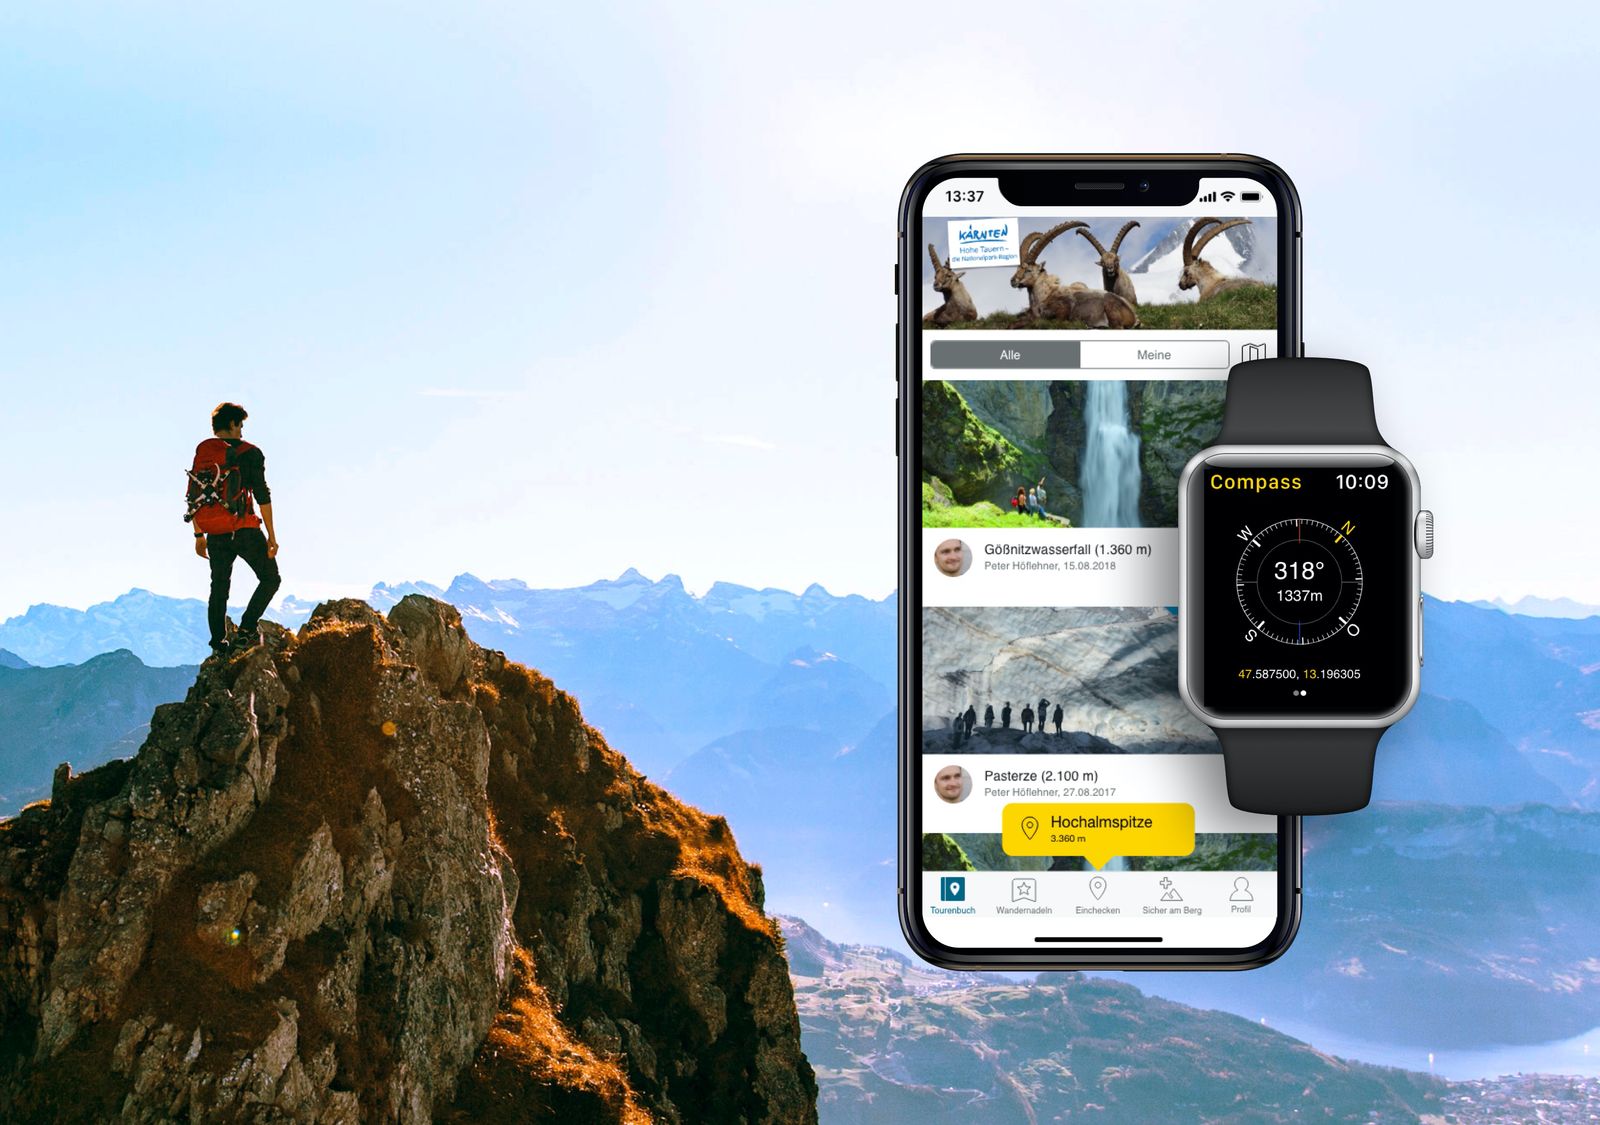 Smartwatch and smartphone mockups with a man standing on a mountain peak in the background